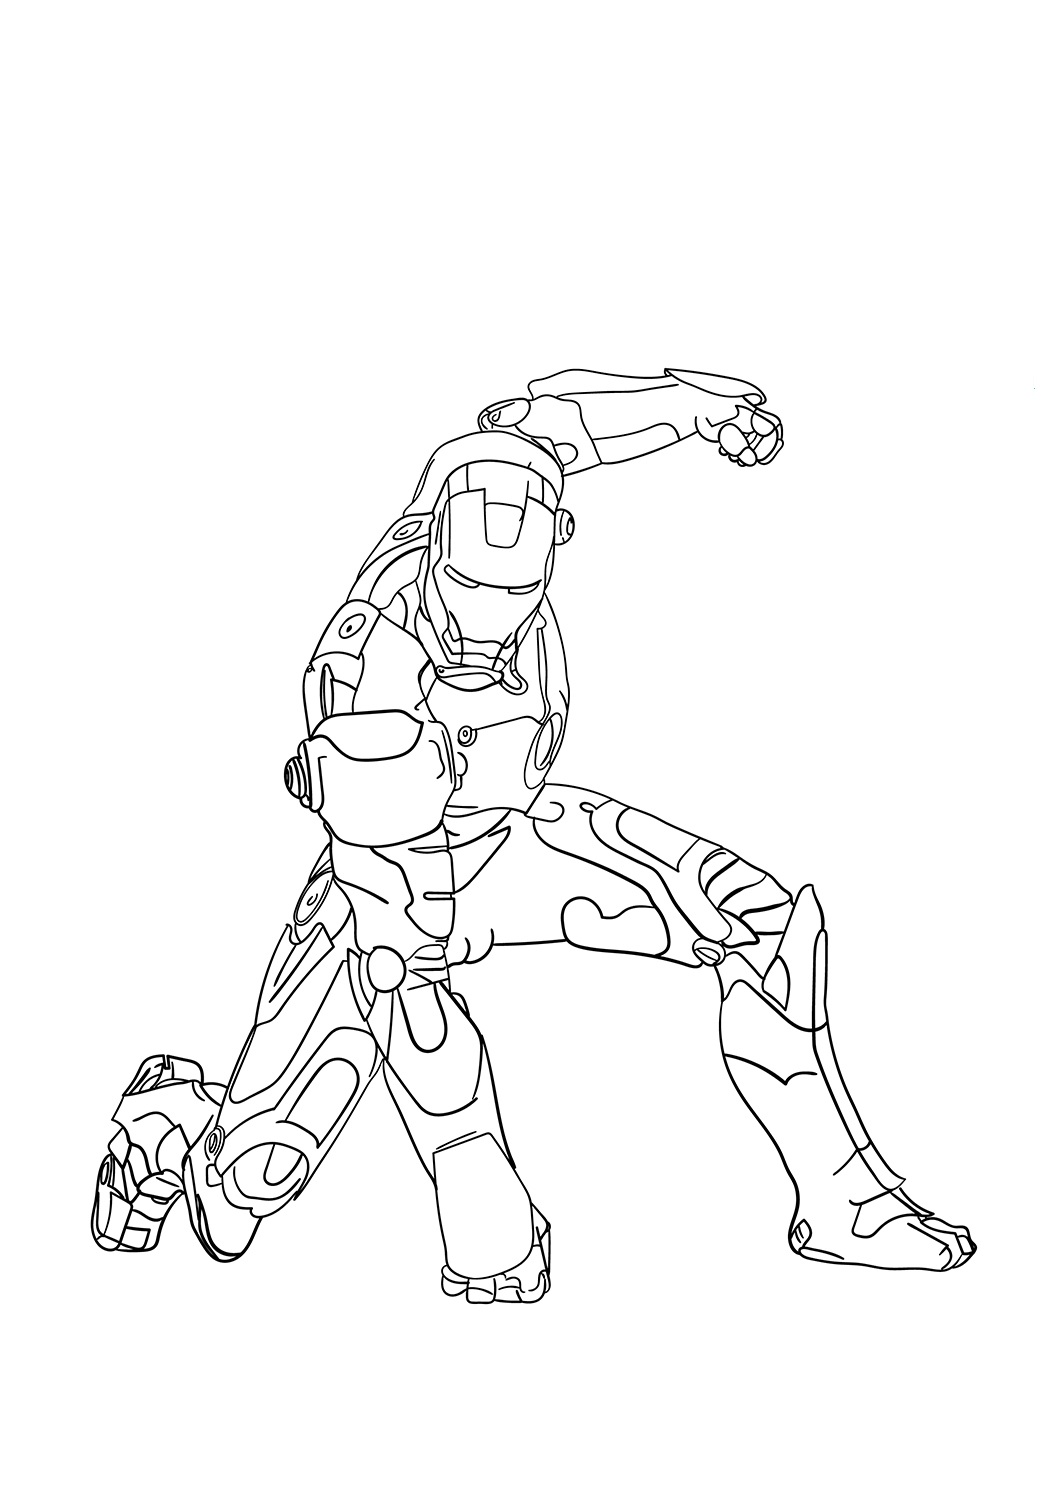 Iron Man Fighting Coloring Page Free Printable Coloring Pages for Kids